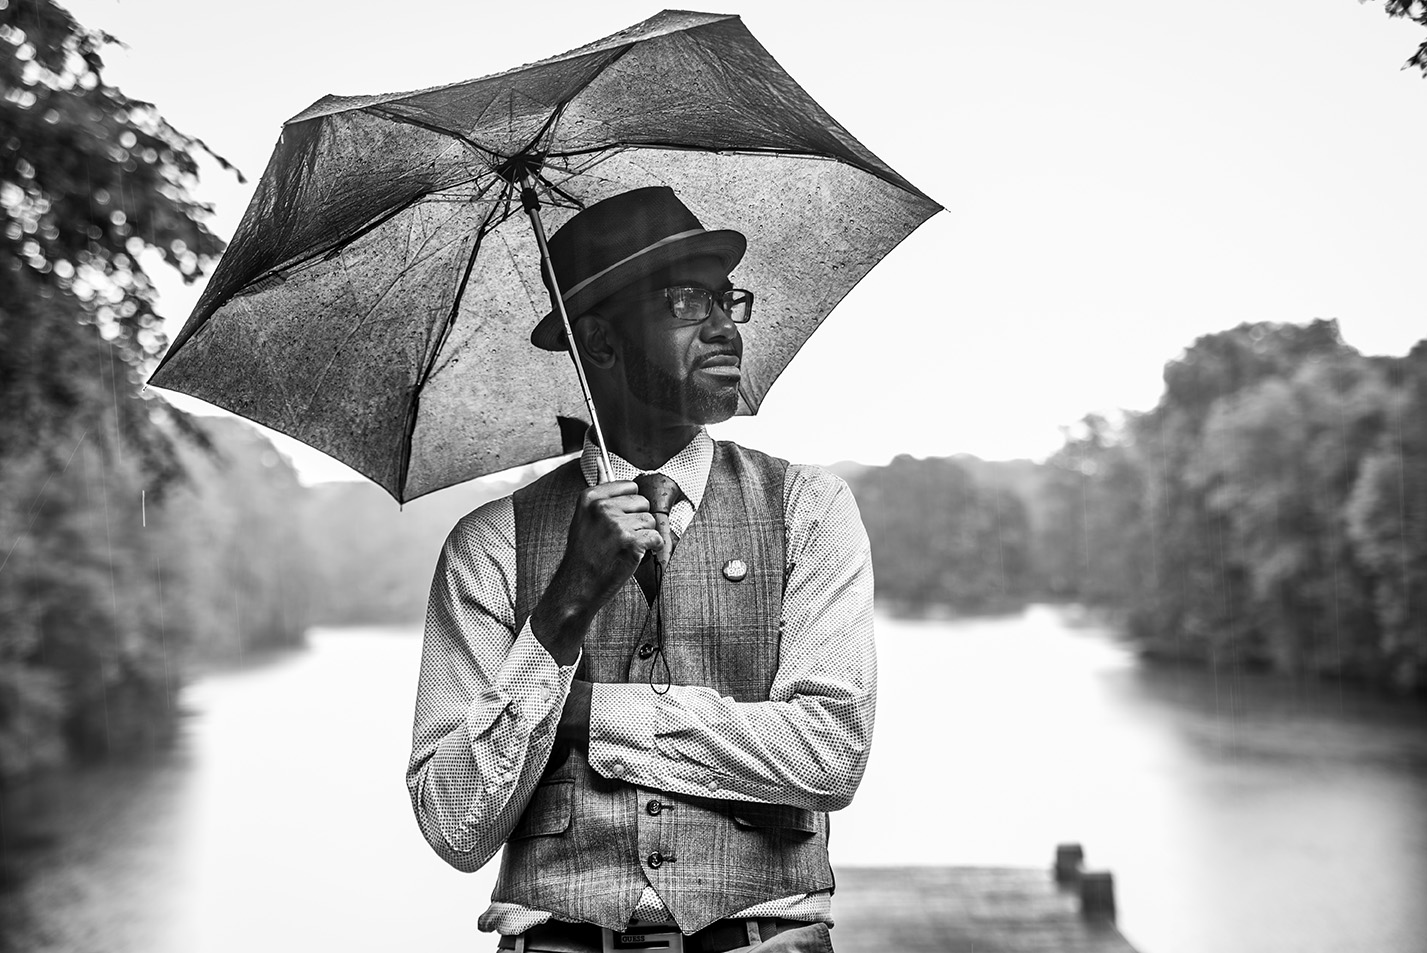 Poet Jon Goode is standing in front of a body of water while holding an umbrella.